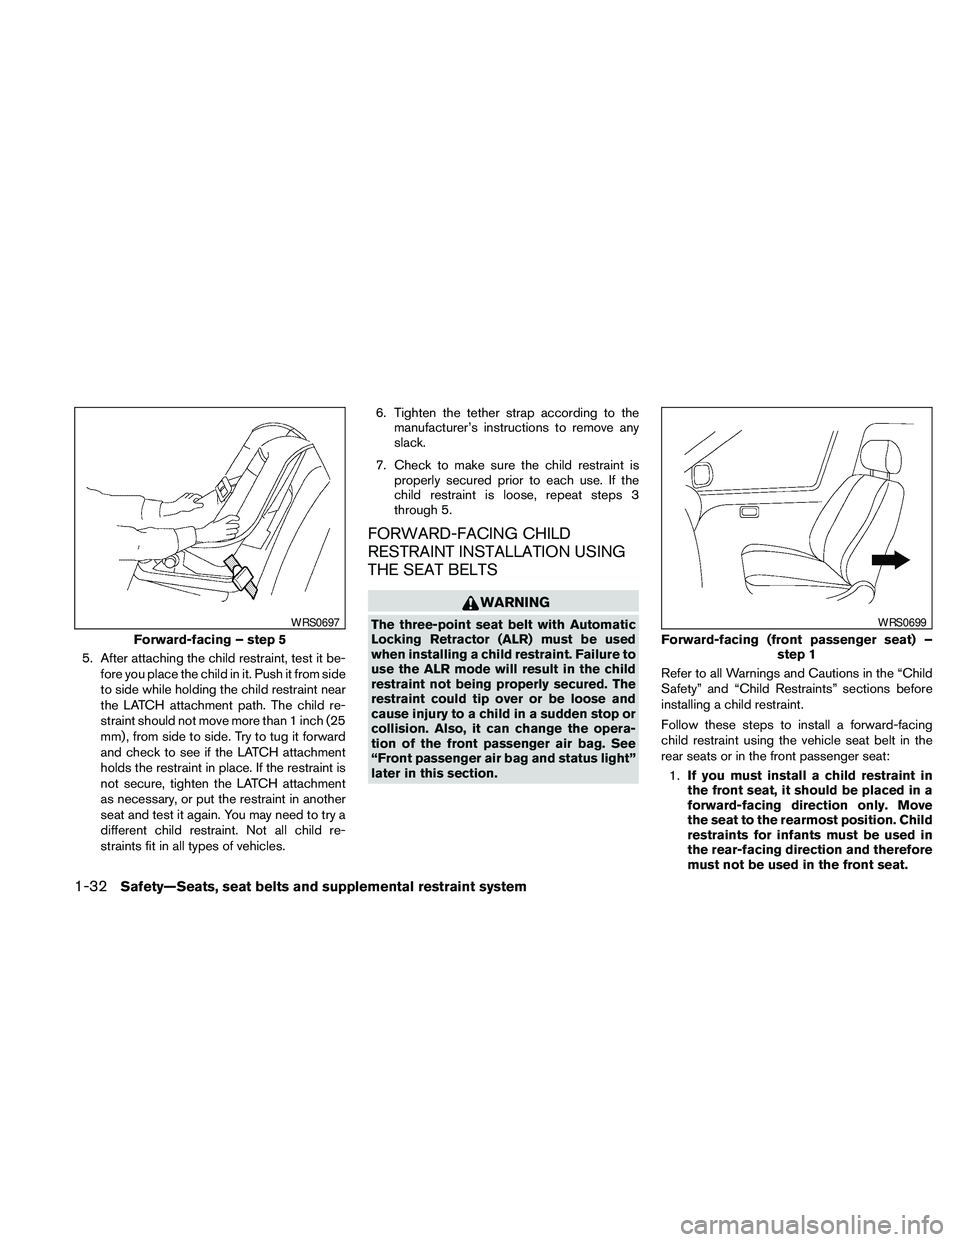 NISSAN MAXIMA 2010  Owner´s Manual 5. After attaching the child restraint, test it be-
fore you place the child in it. Push it from side
to side while holding the child restraint near
the LATCH attachment path. The child re-
straint sh